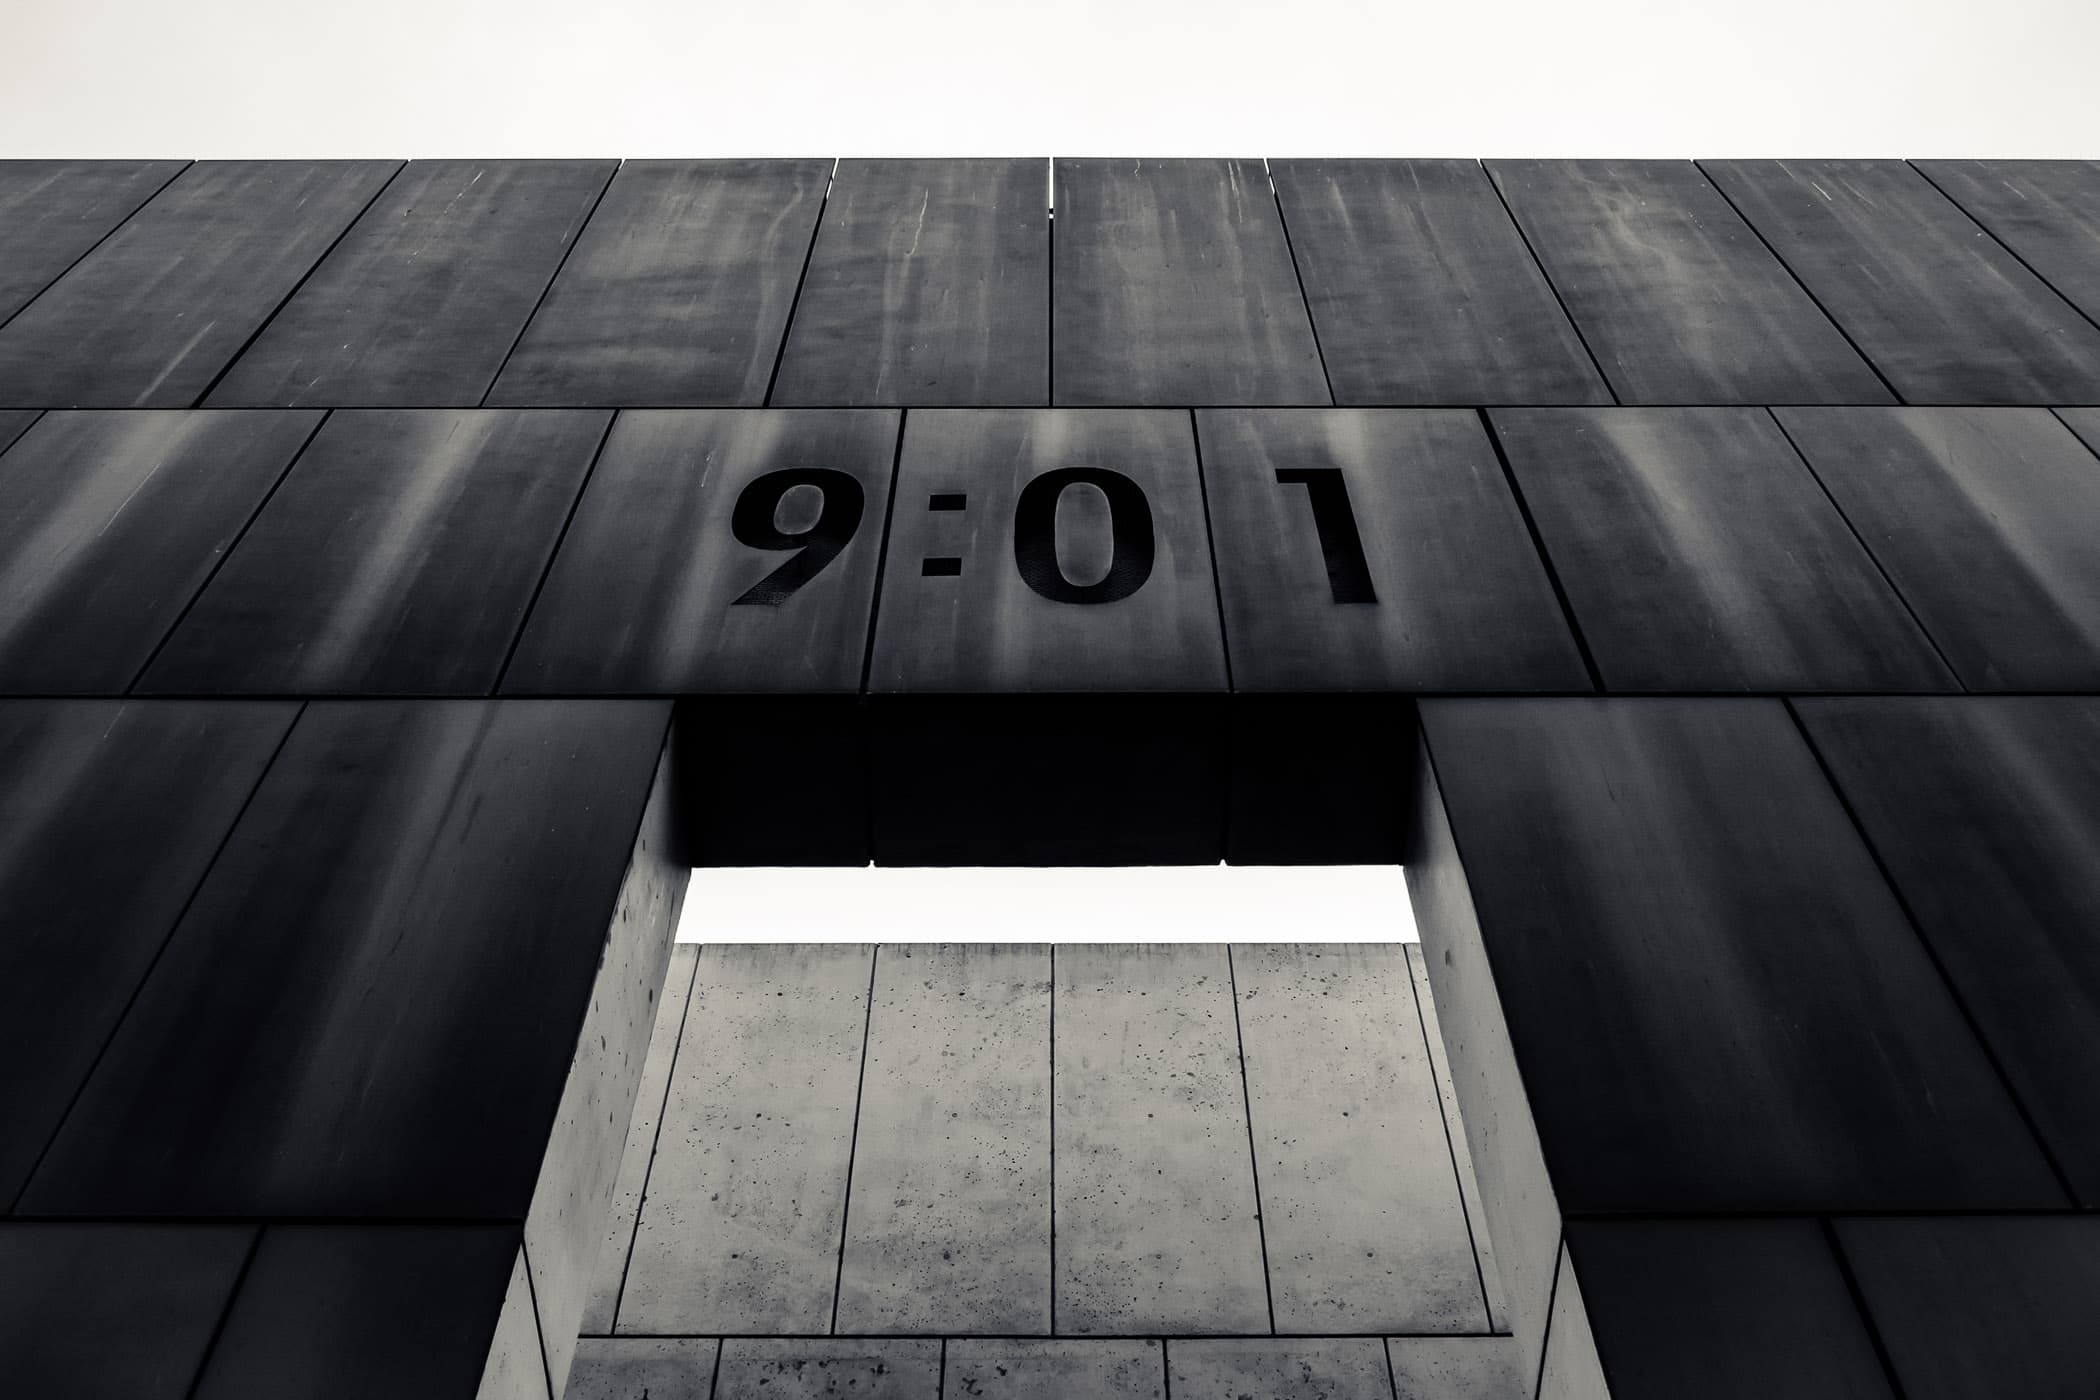 The eastern-most of the Gates of Time at the Oklahoma City National Memorial. Marked with the time 9:01 to signify the last minute of peace prior to the bombing of the Alfred P. Murrah Federal Building on April 19, 1995. A companion gate at the western end of the memorial is marked 9:03 to represent the fist minute of recovery after the 9:02 AM explosion.